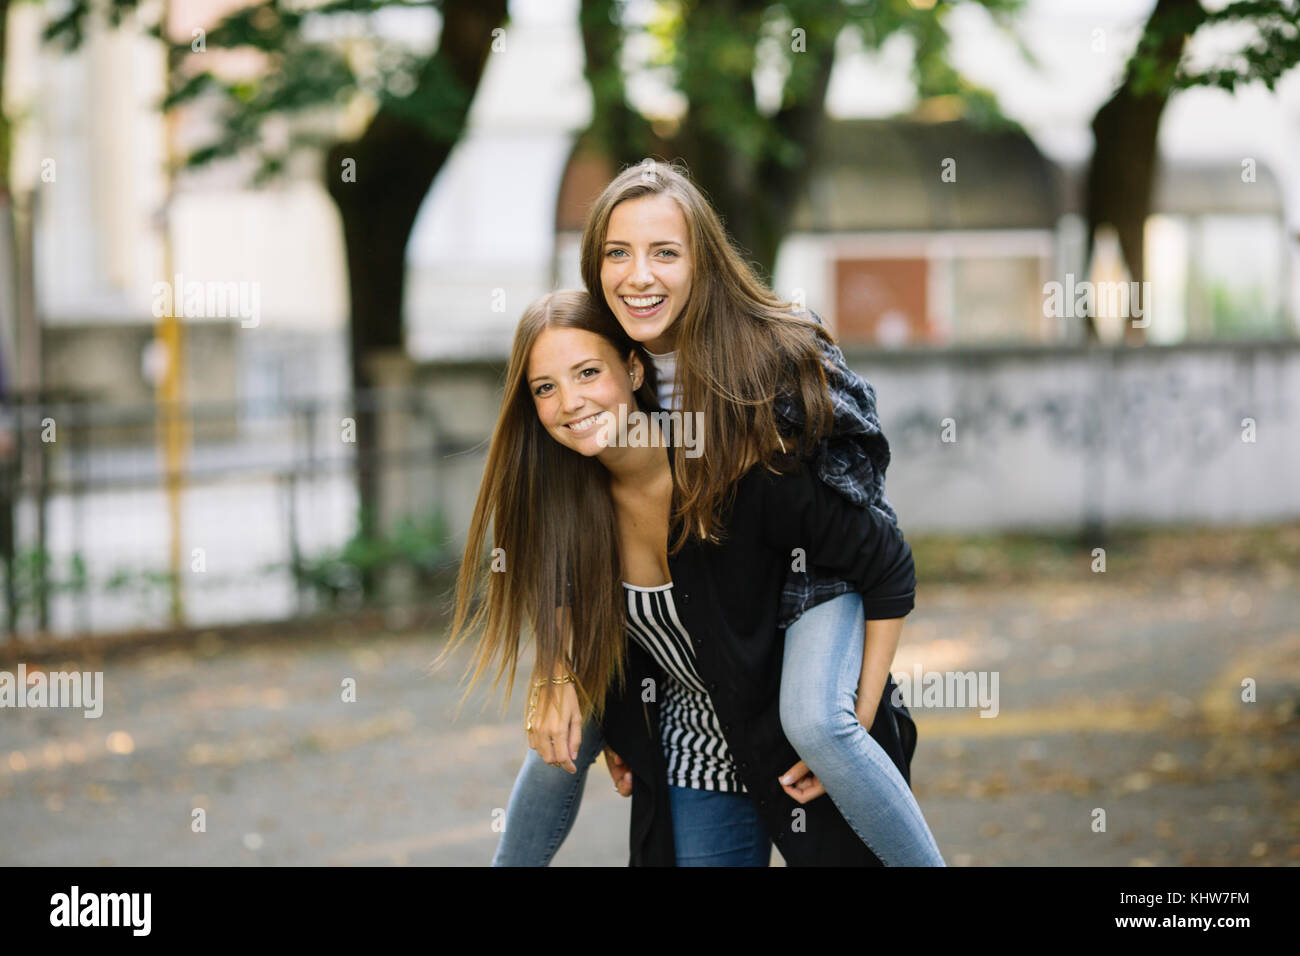 Portrait of young woman giving best friend a piggy back in park Stock Photo